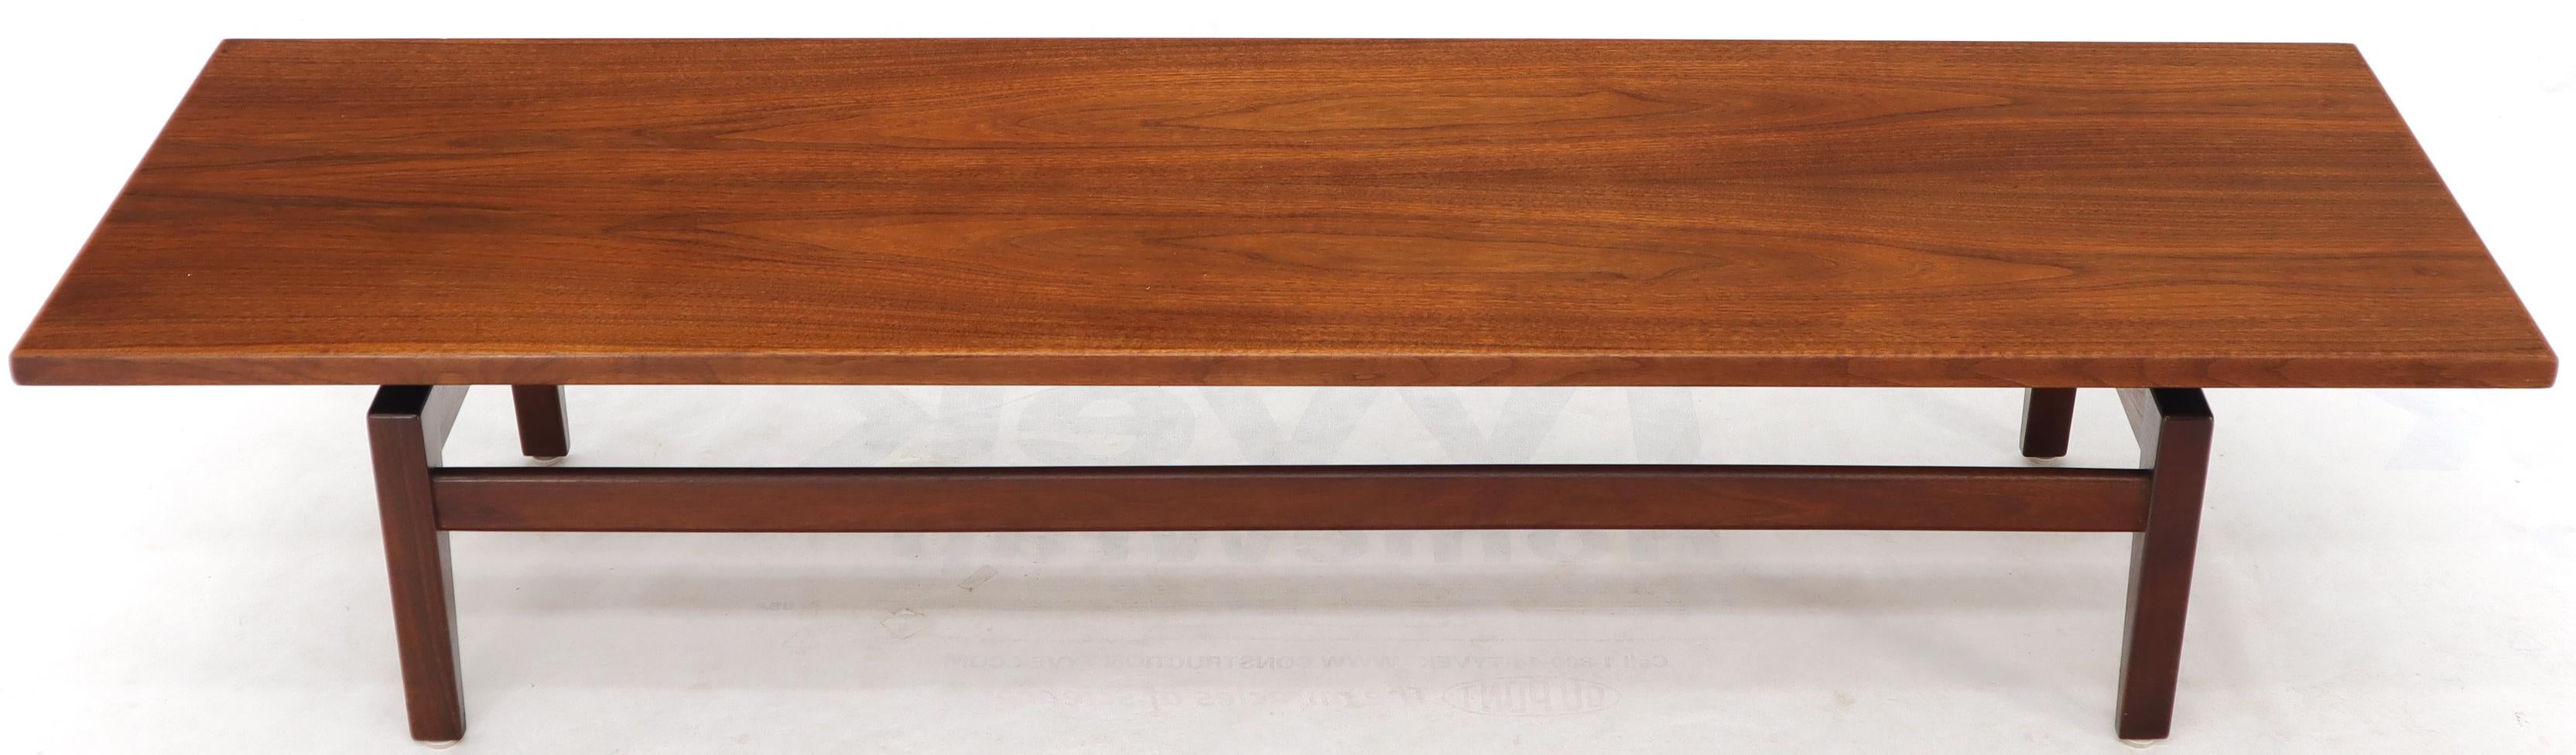 Floating Top Solid Oiled Walnut Low Coffee Table or Long Bench by Jens Risom 1